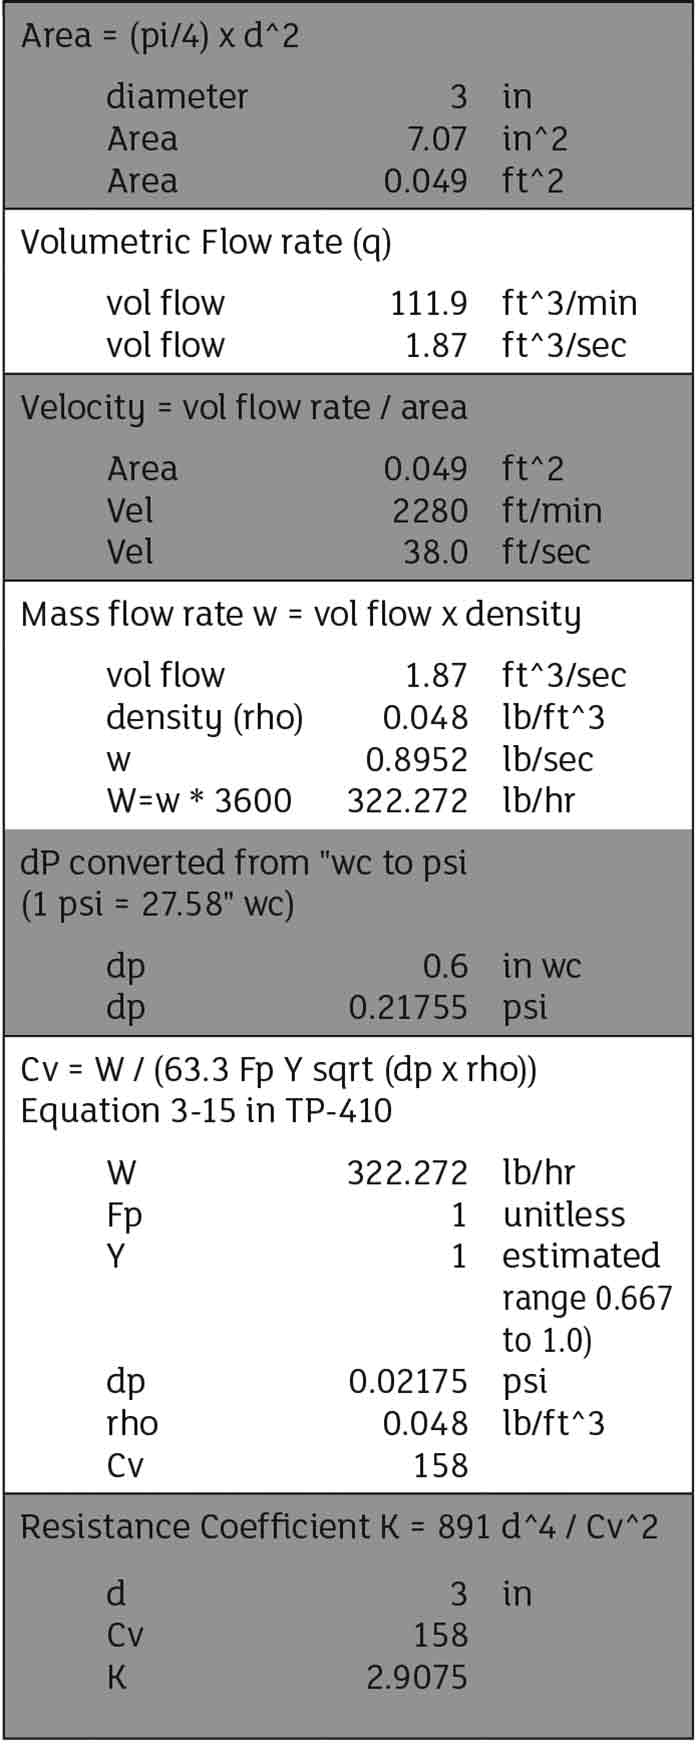 Calculate C<sub>v</sub> and K from d (inches), volumetric flow rate (cfm), and dP (inches wc)